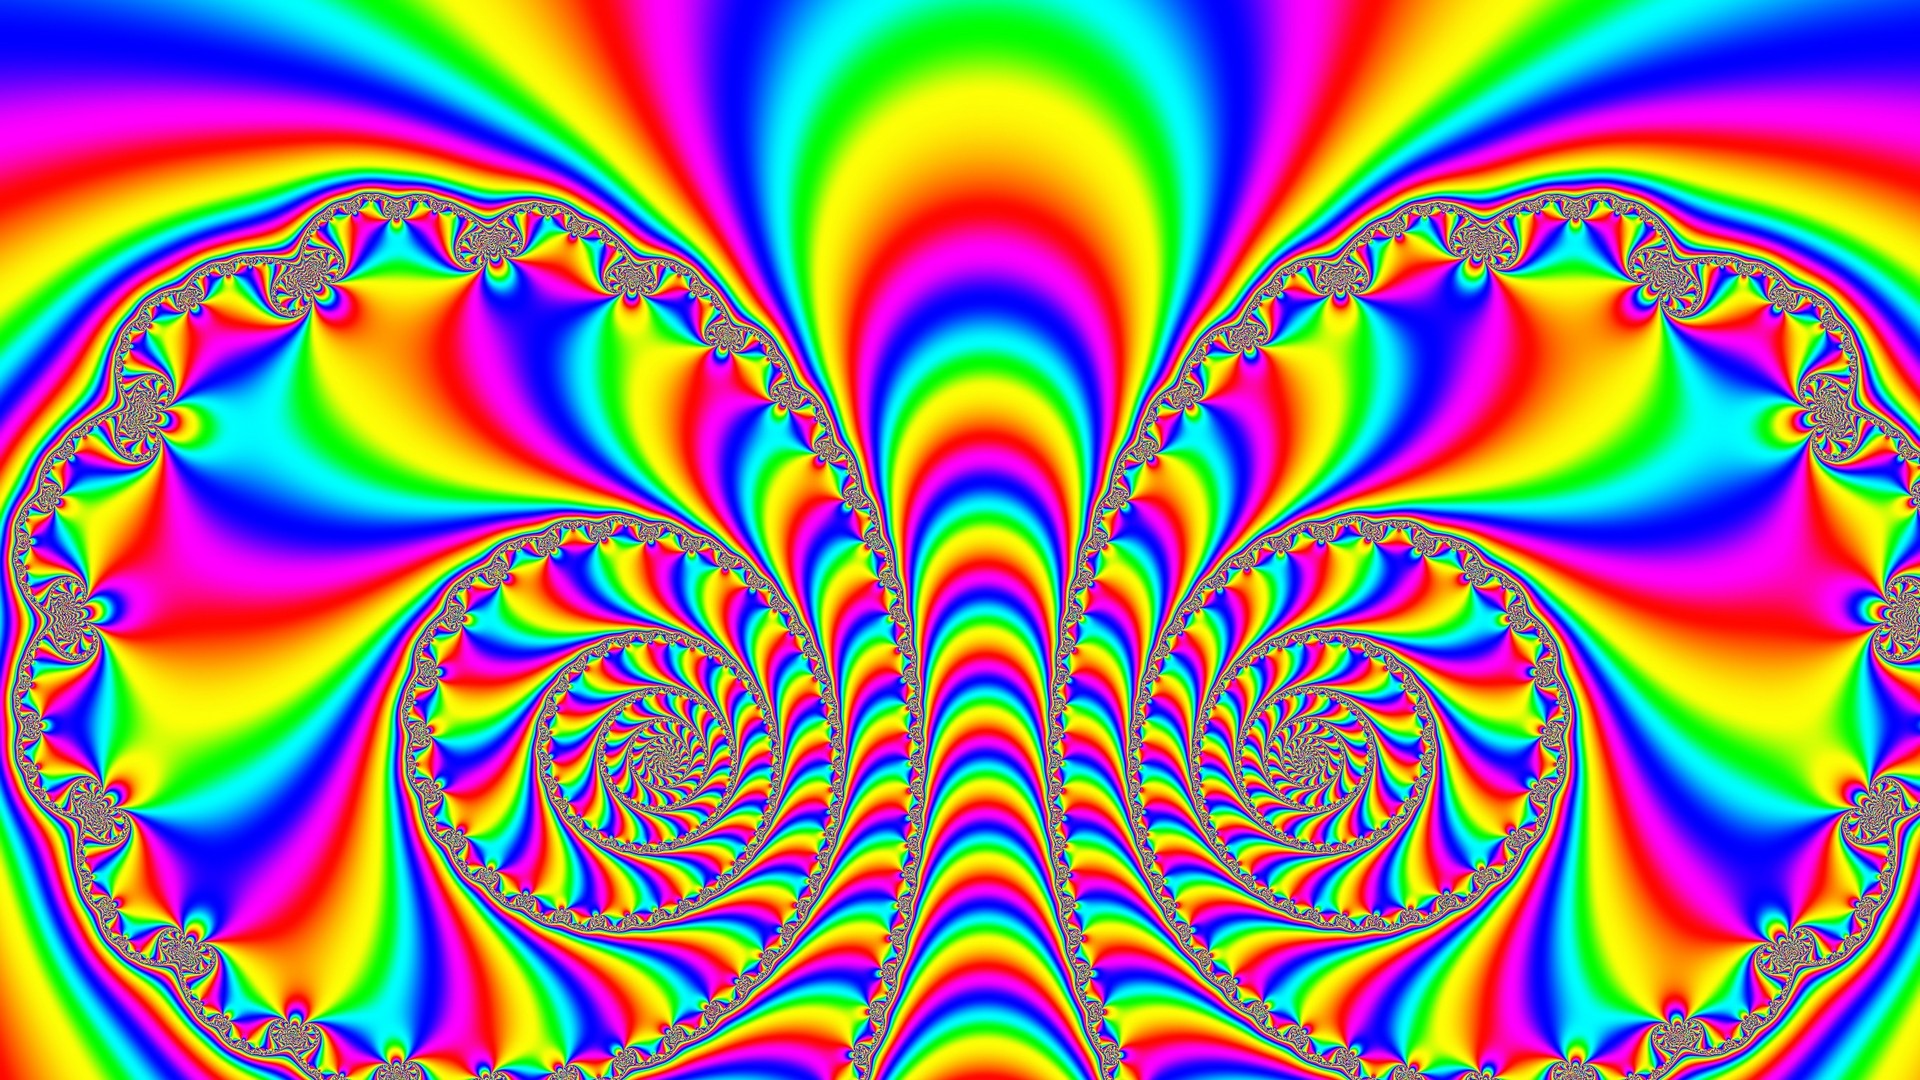 HD Wallpaper Trippy Colorful With Resolution 1920X1080